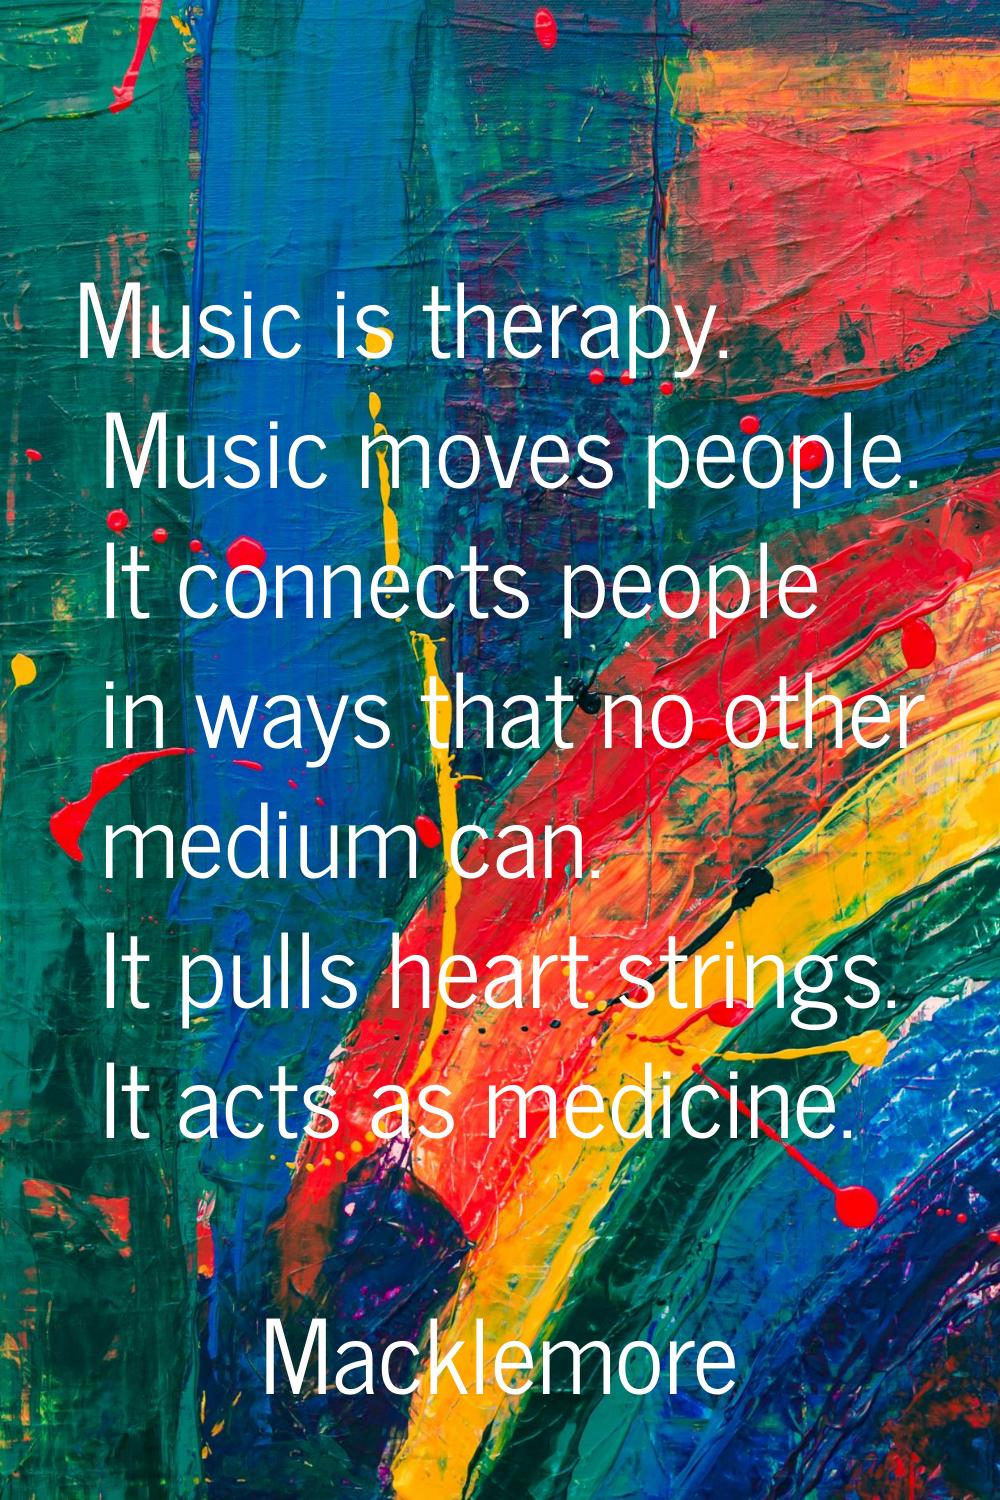 Music is therapy. Music moves people. It connects people in ways that no other medium can. It pulls